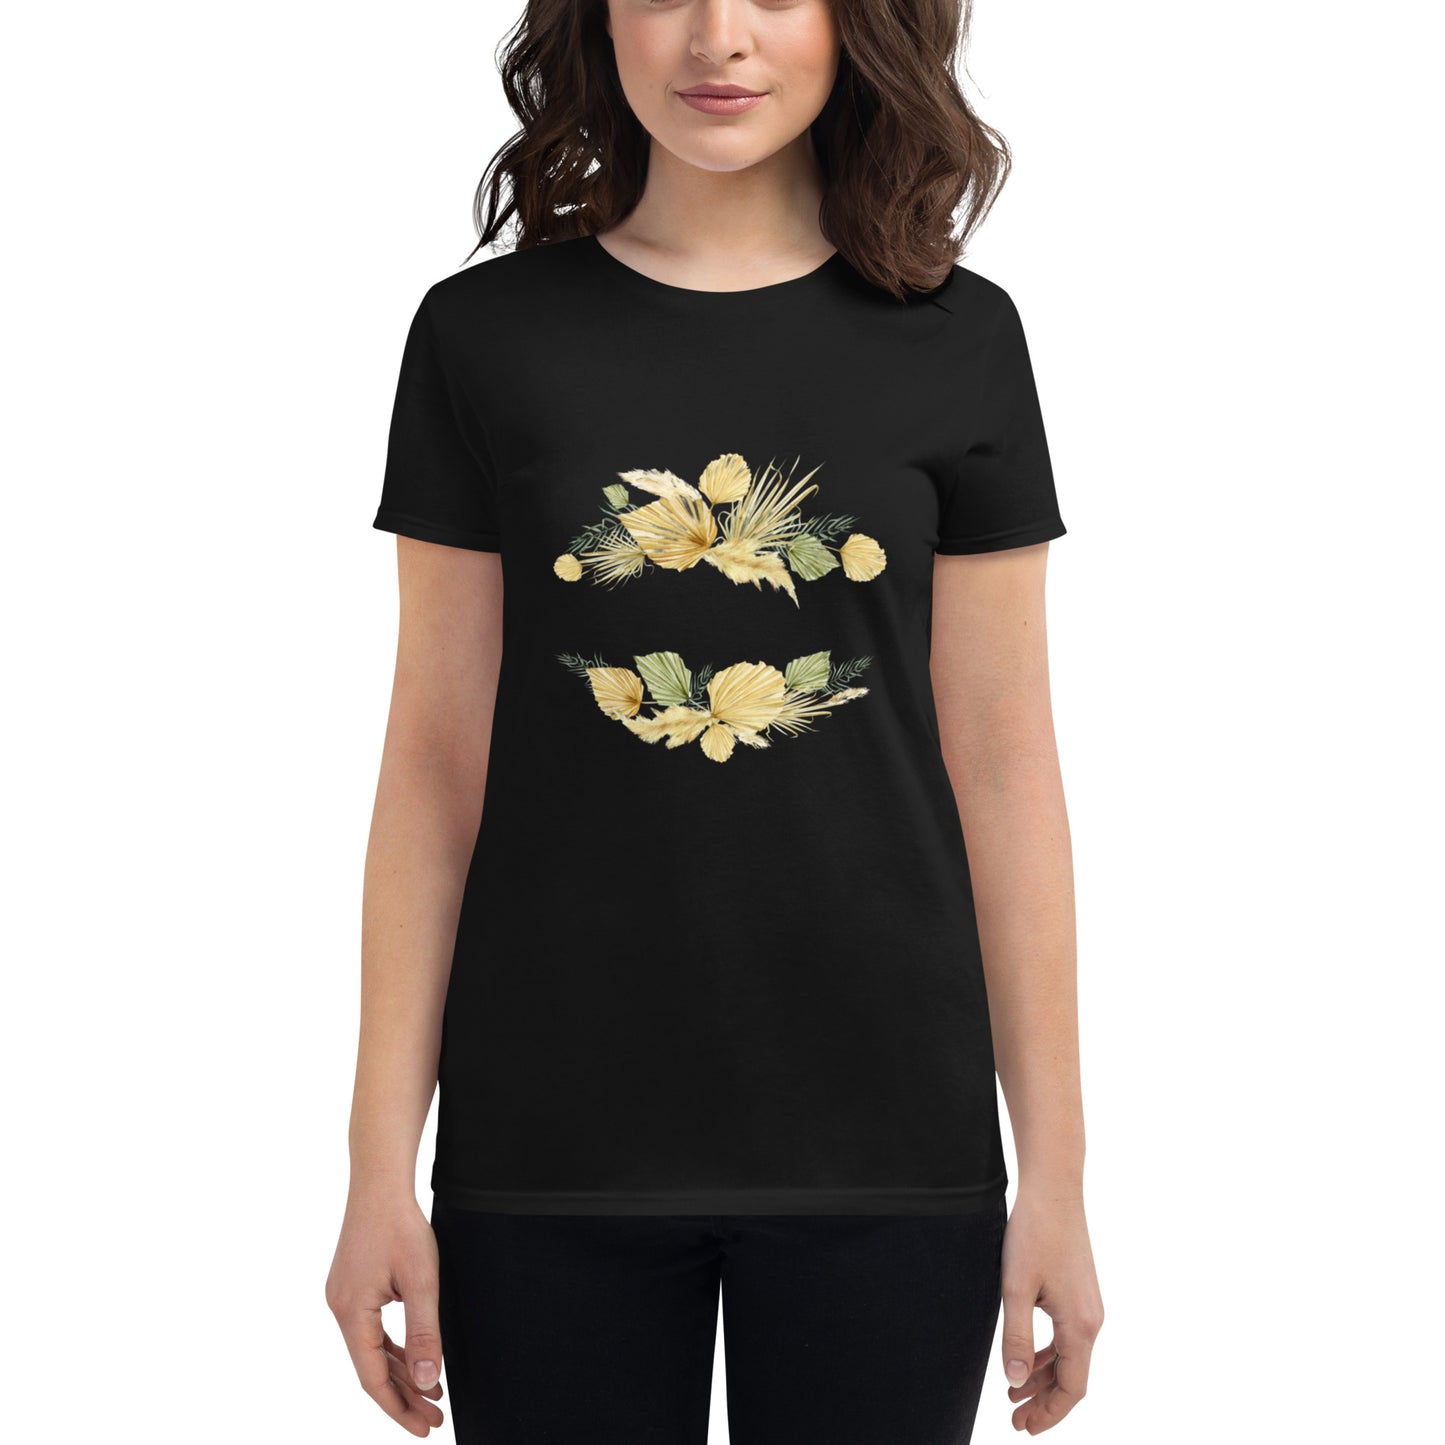 Floral-Designed Short Sleeve Women's T-Shirt in Cotton & Cotton-Polyester Blends